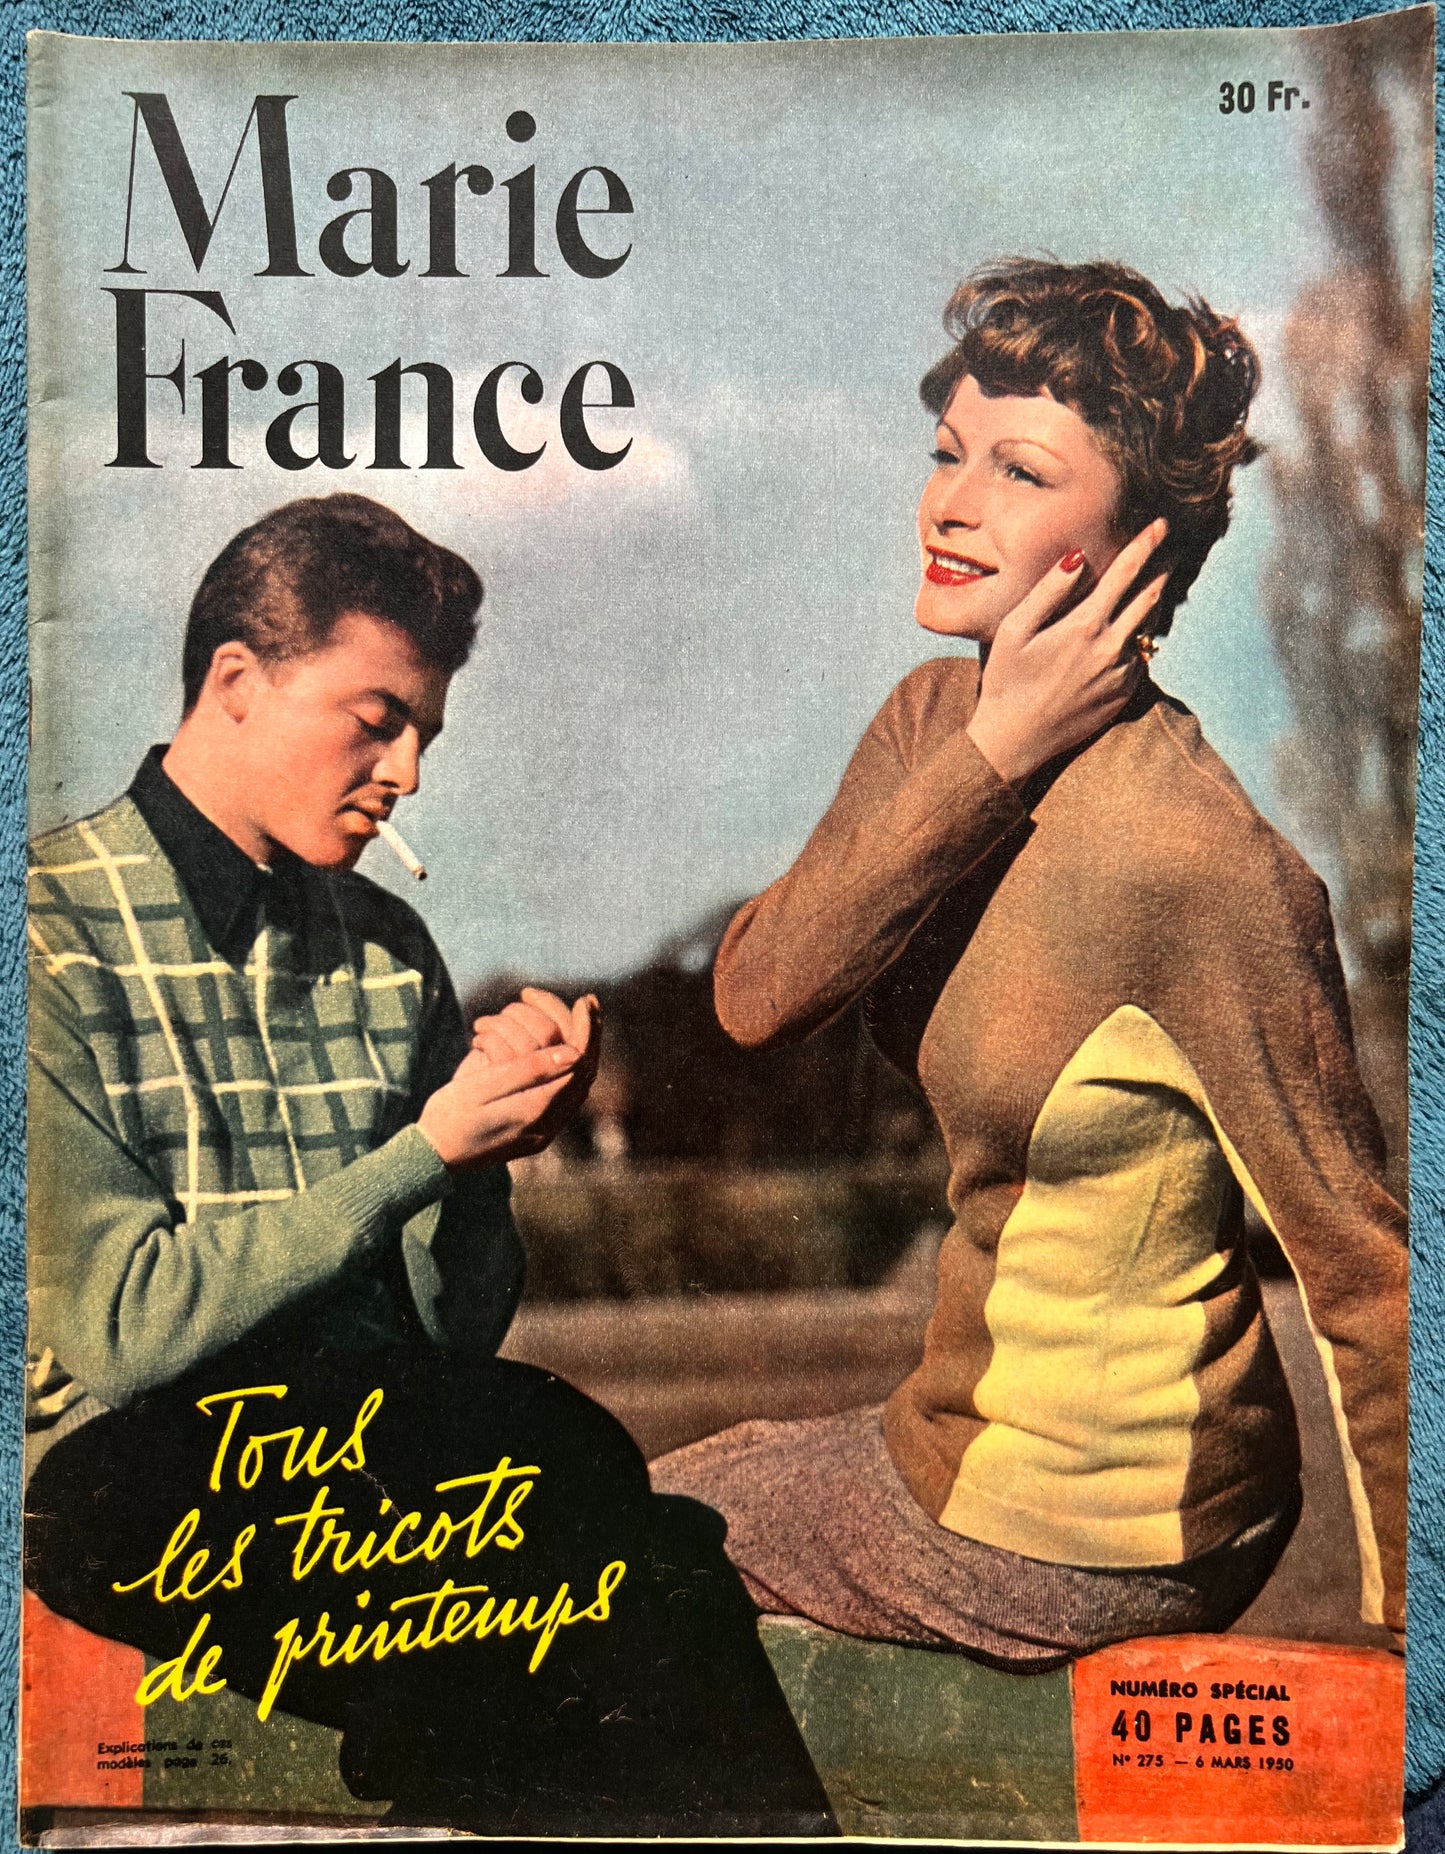 Spring Knitting Patterns  in March 1950 French Women's Magazine Marie France